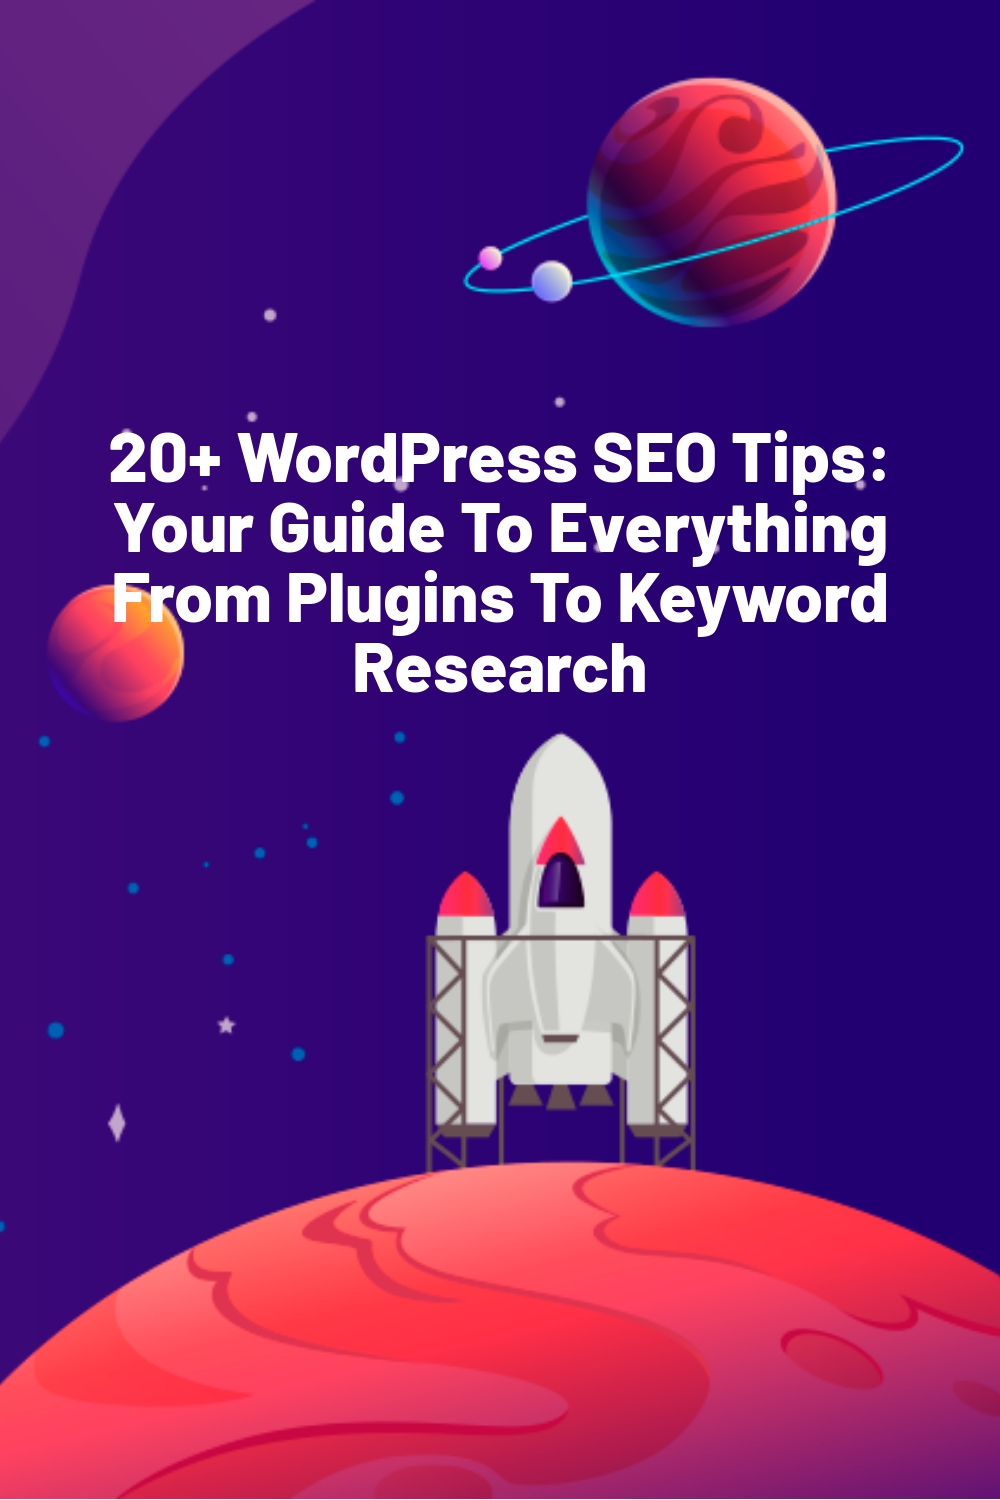 20+ WordPress SEO Tips: Your Guide To Everything From Plugins To Keyword Research